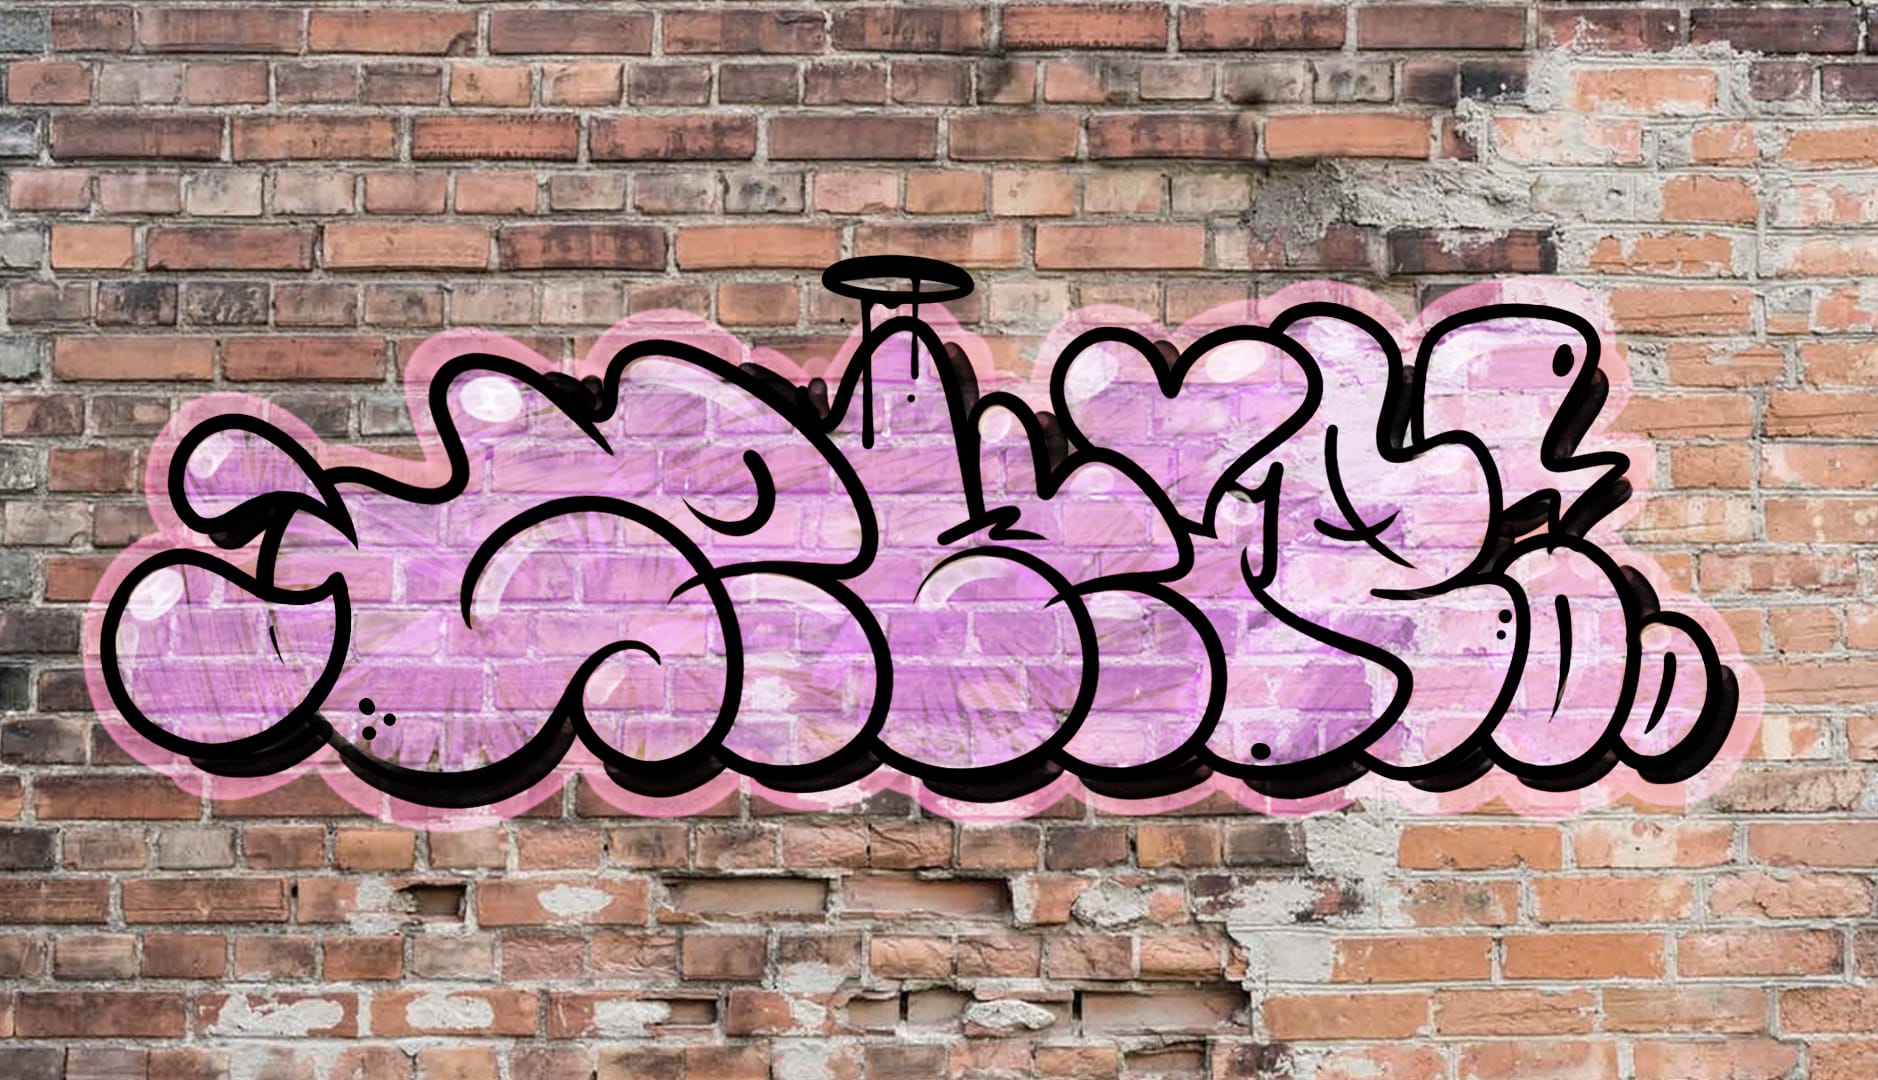 Draw original graffiti throw up for you by Onepikes